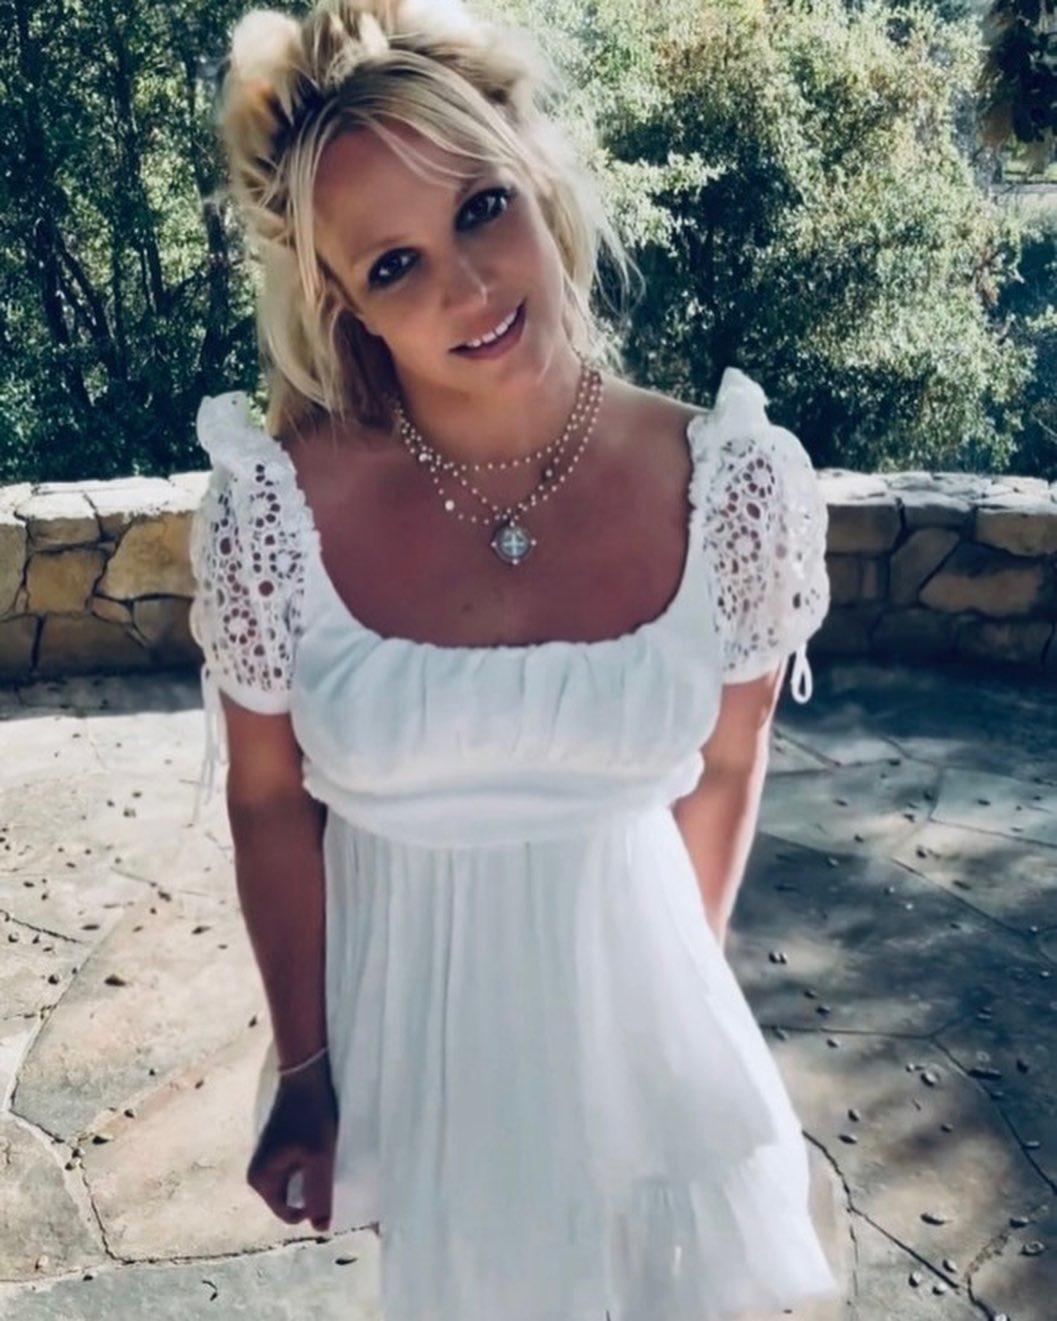 Britney Spears Tugs Down Her Sleeves To Make A Strapless Dress